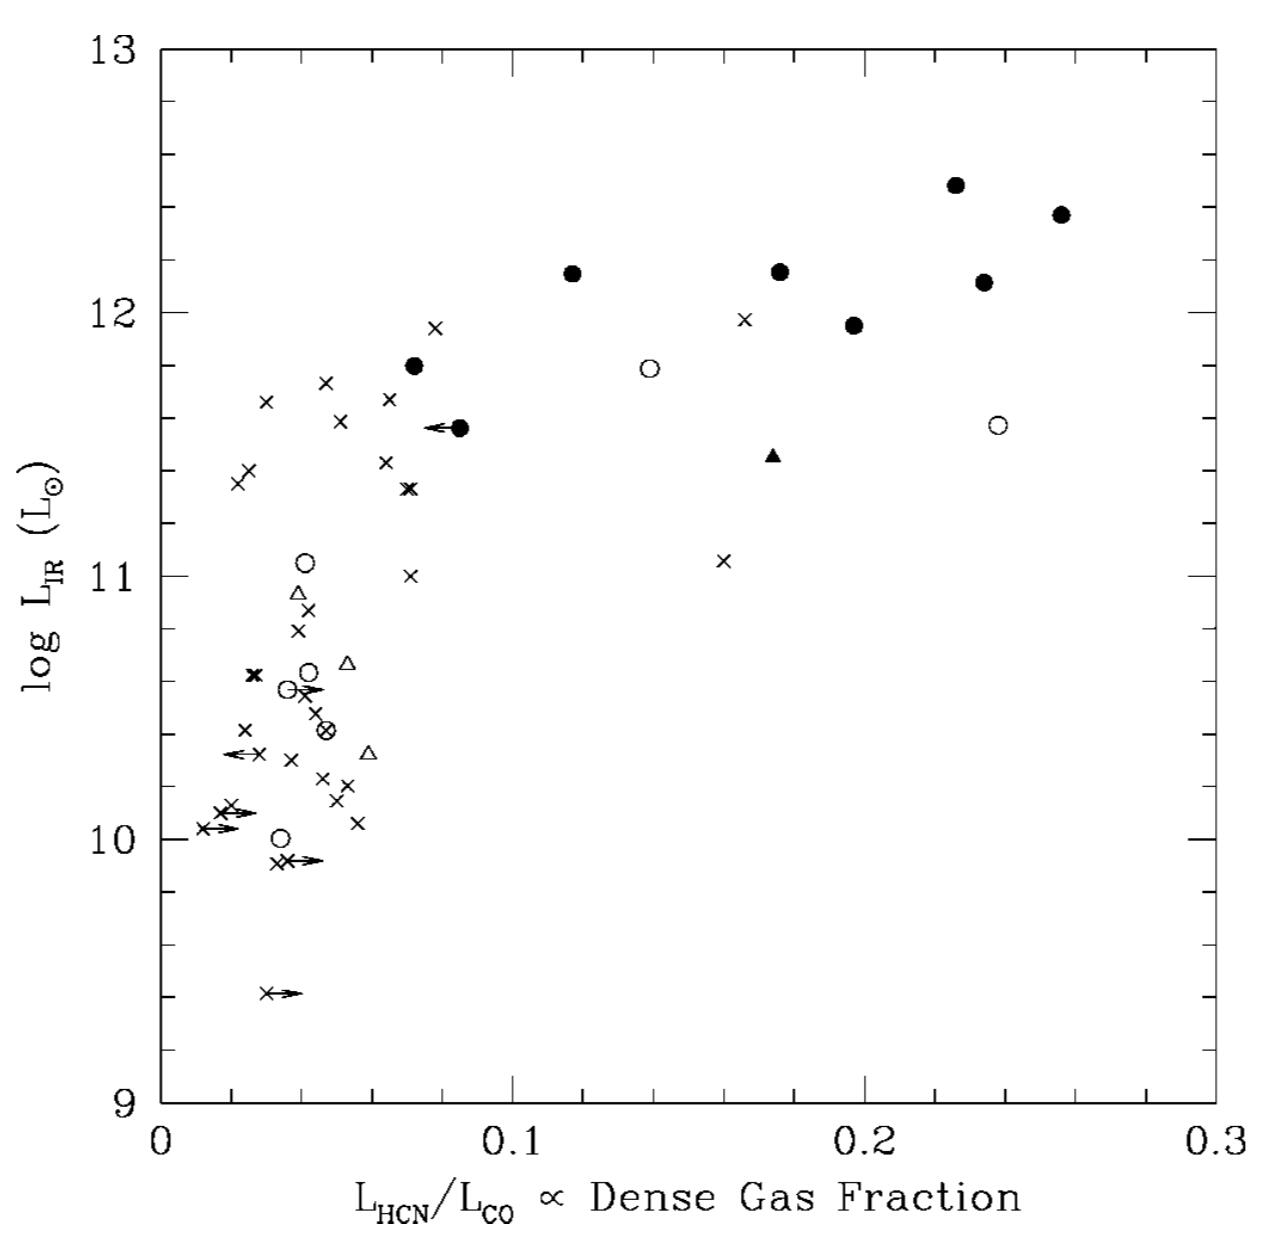 IR luminosity vs dense gas fraction for masing and non-masing (U)LIRGs from Darling (2007)